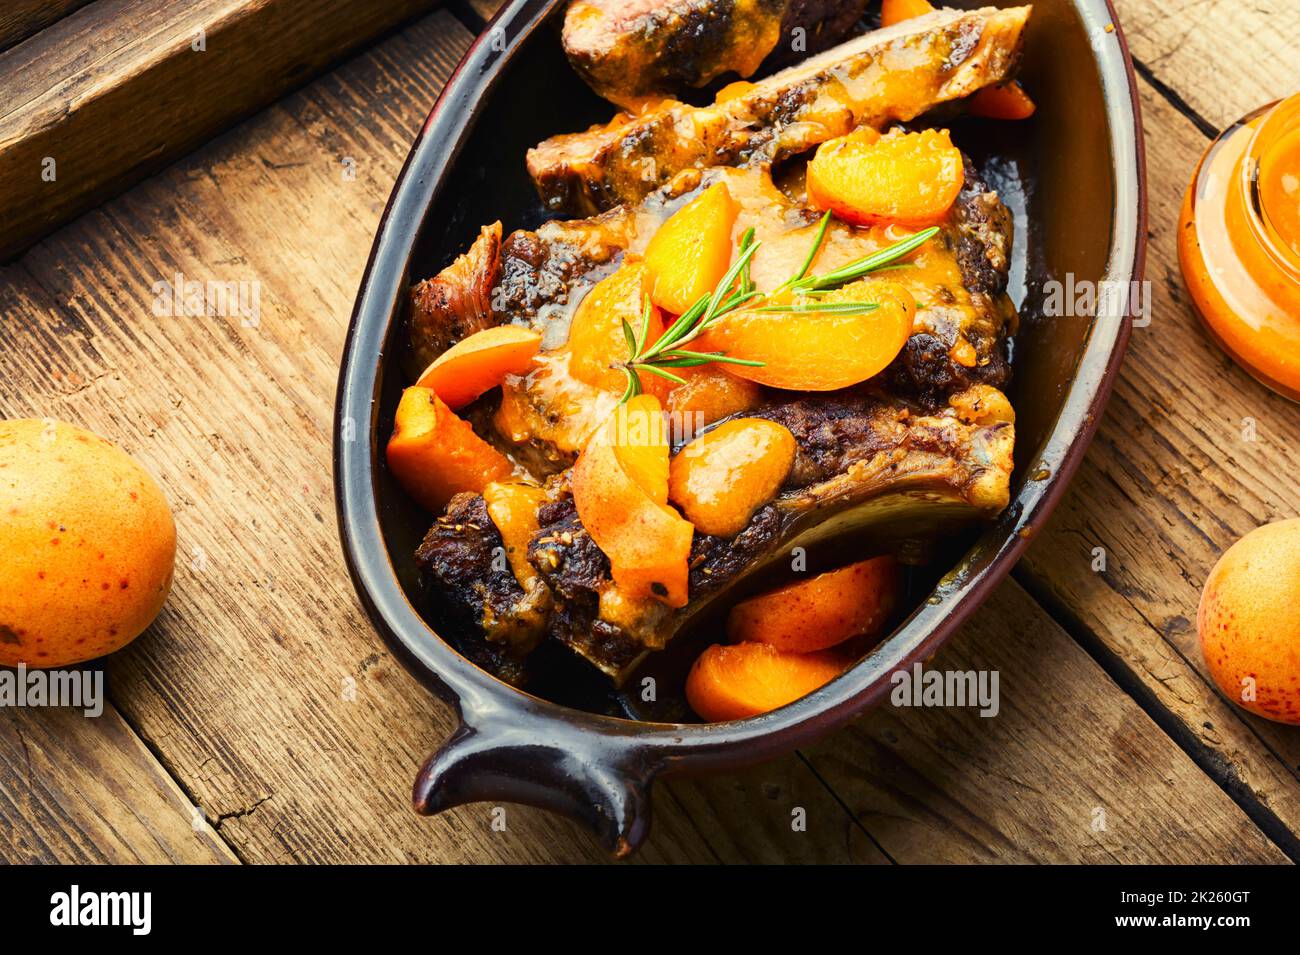 Fried beef ribs in fruit sauce. Stock Photo